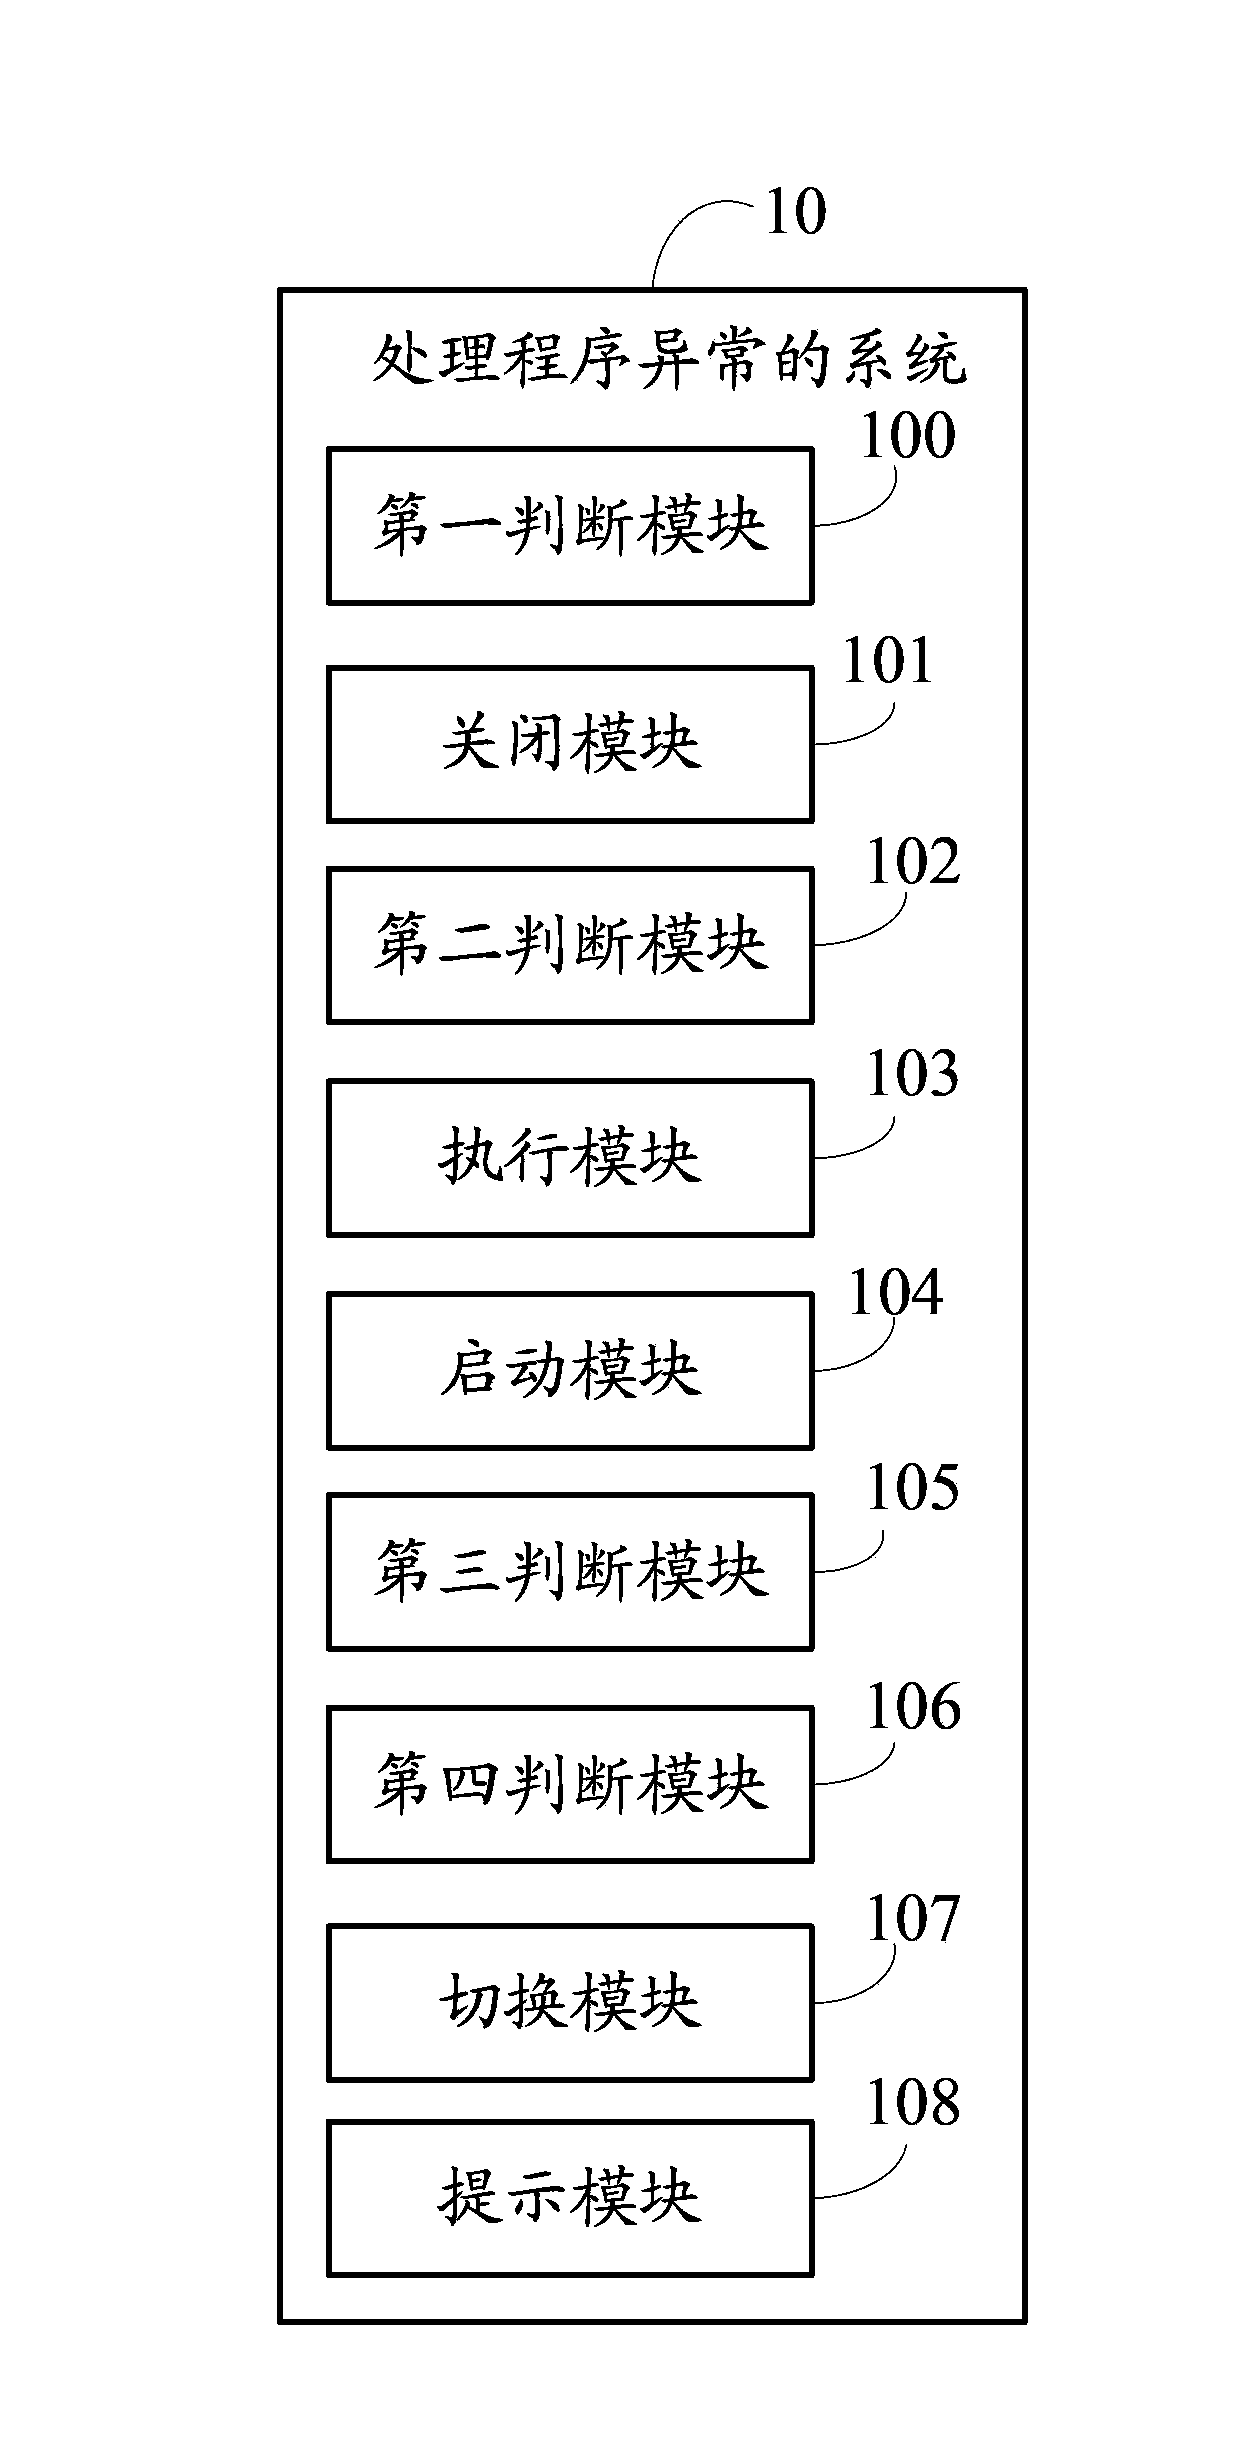 Program exception processing system and method